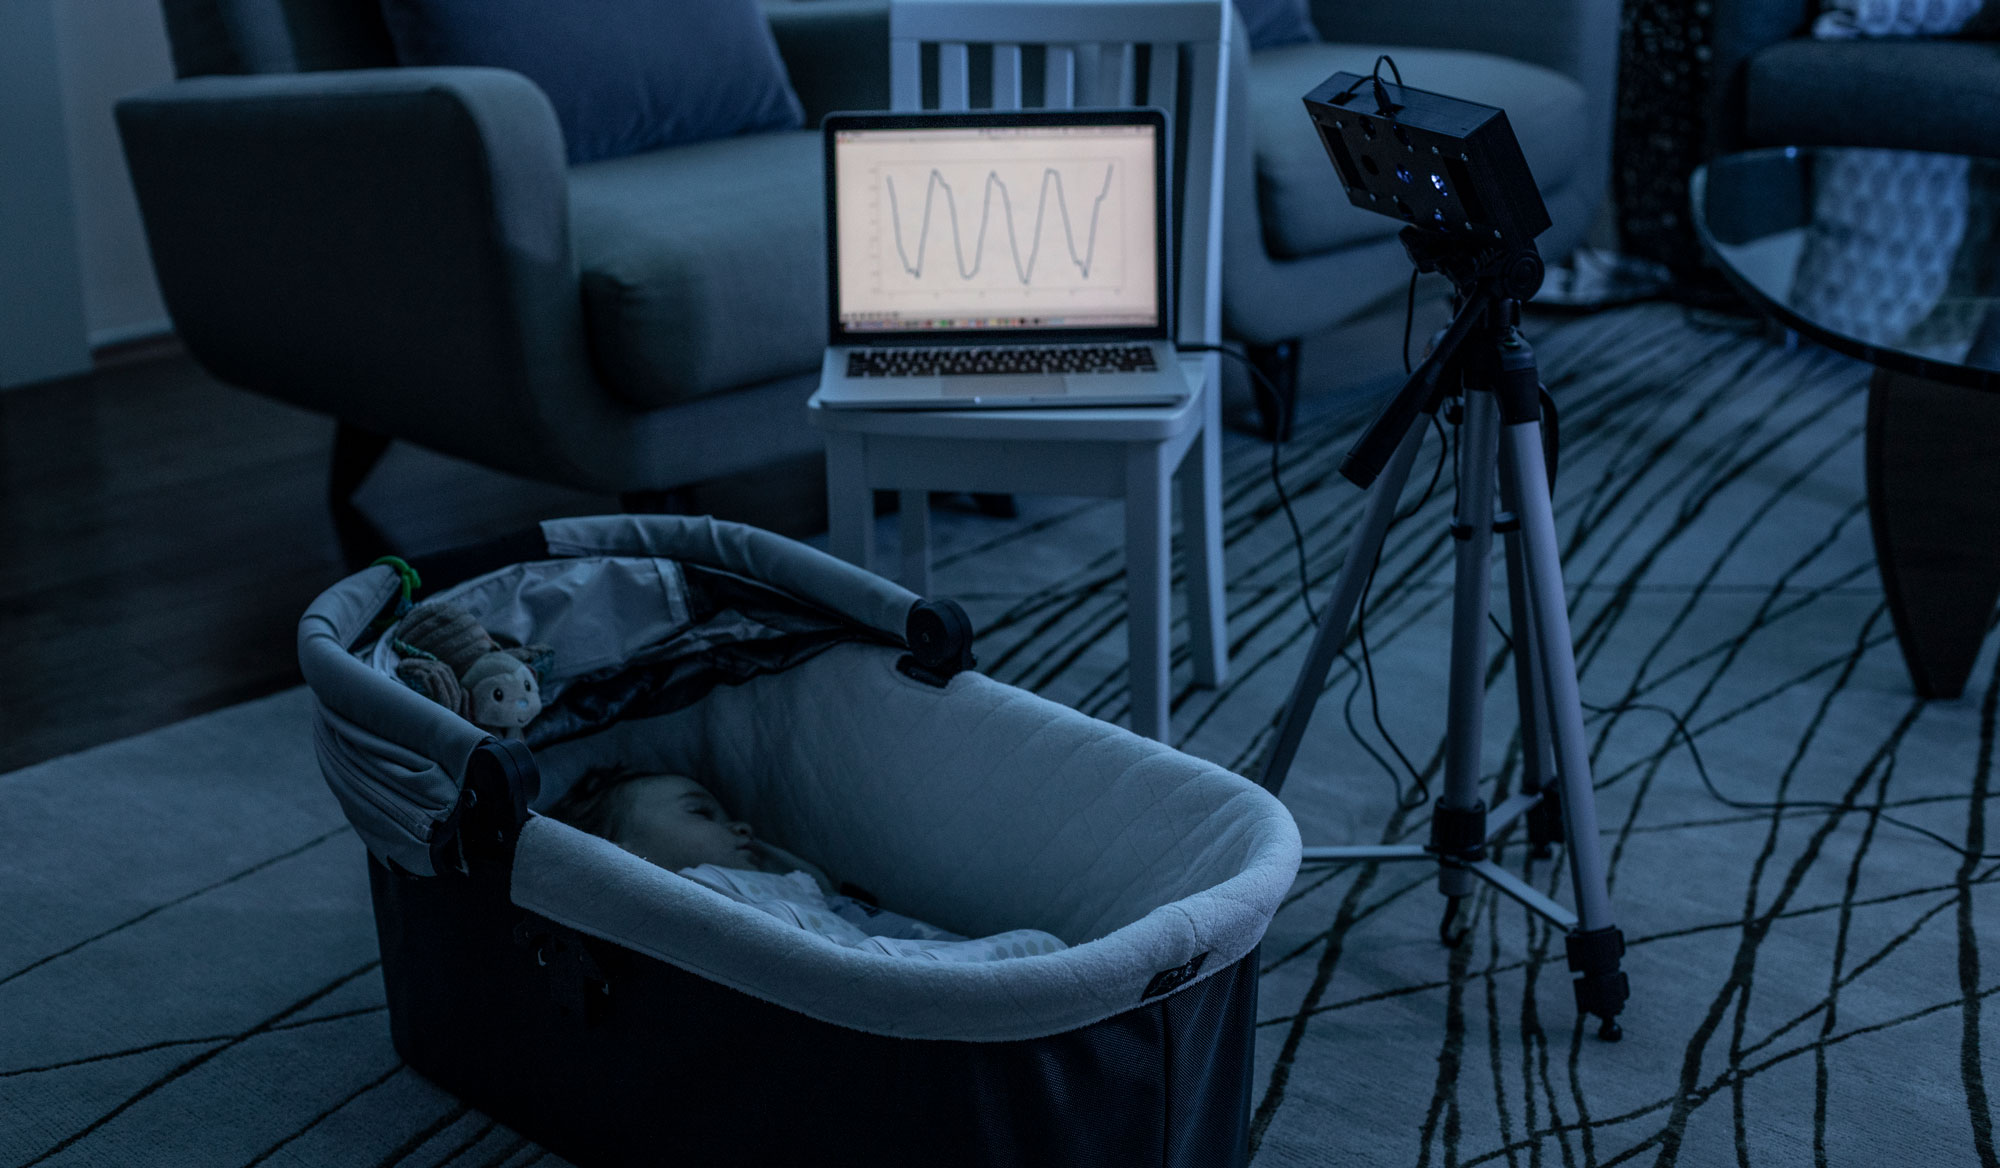 A baby sleeping in a cot has their breathing monitored remotely